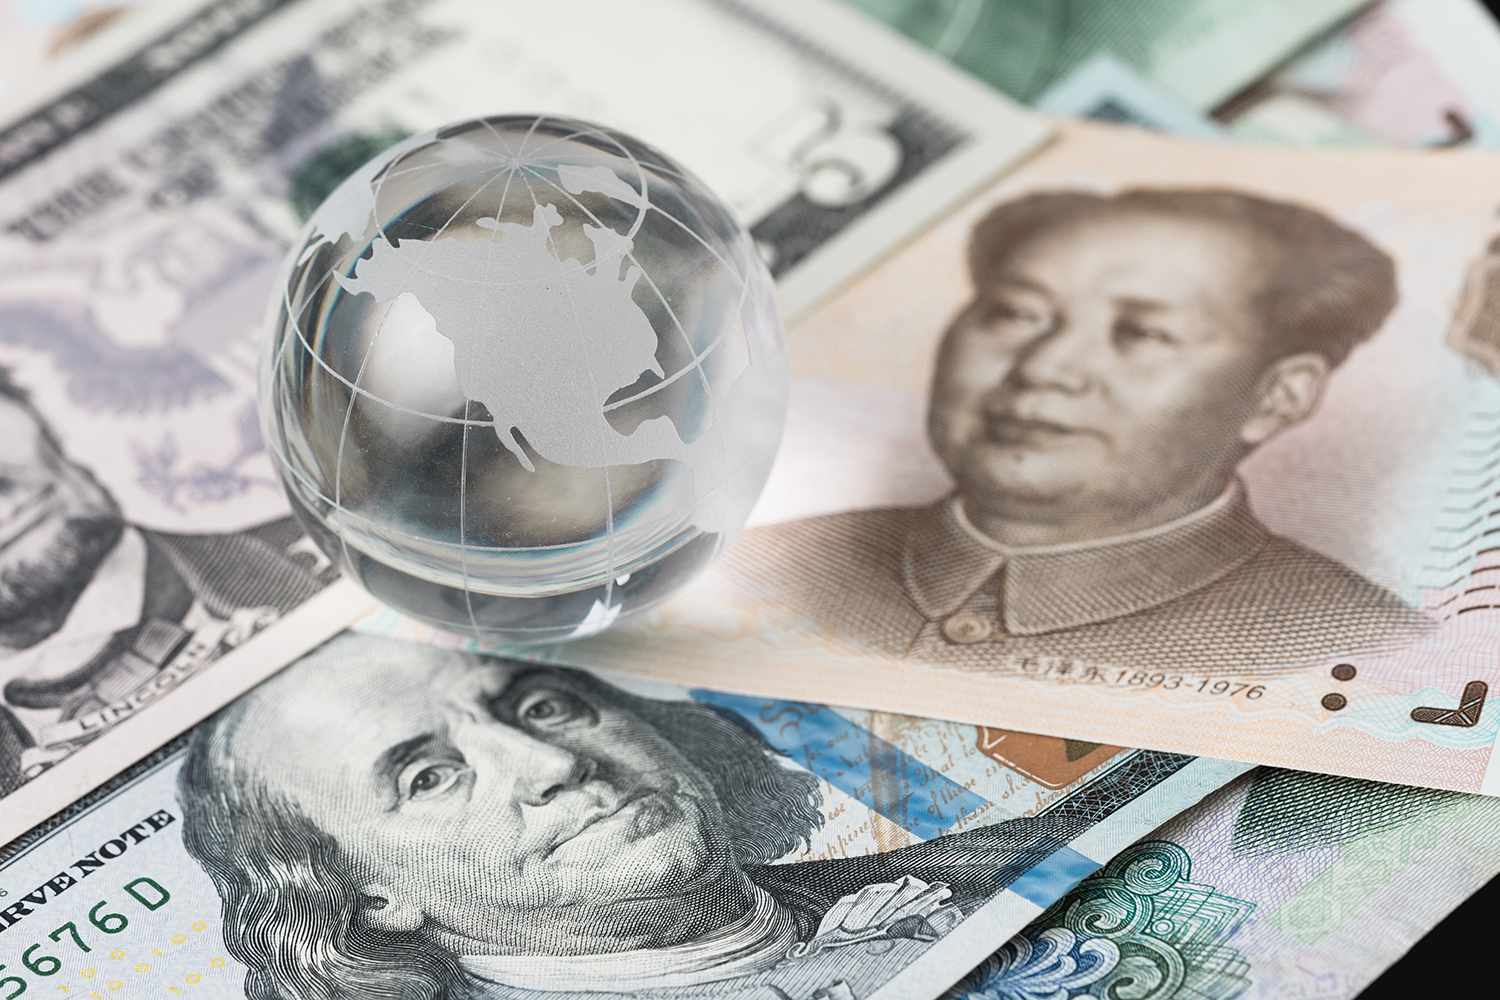 US and China trade barrier, an action by a government that makes trade between the country and other countries more difficult, decoraton glass globe on US dollar and china yuan banknotes